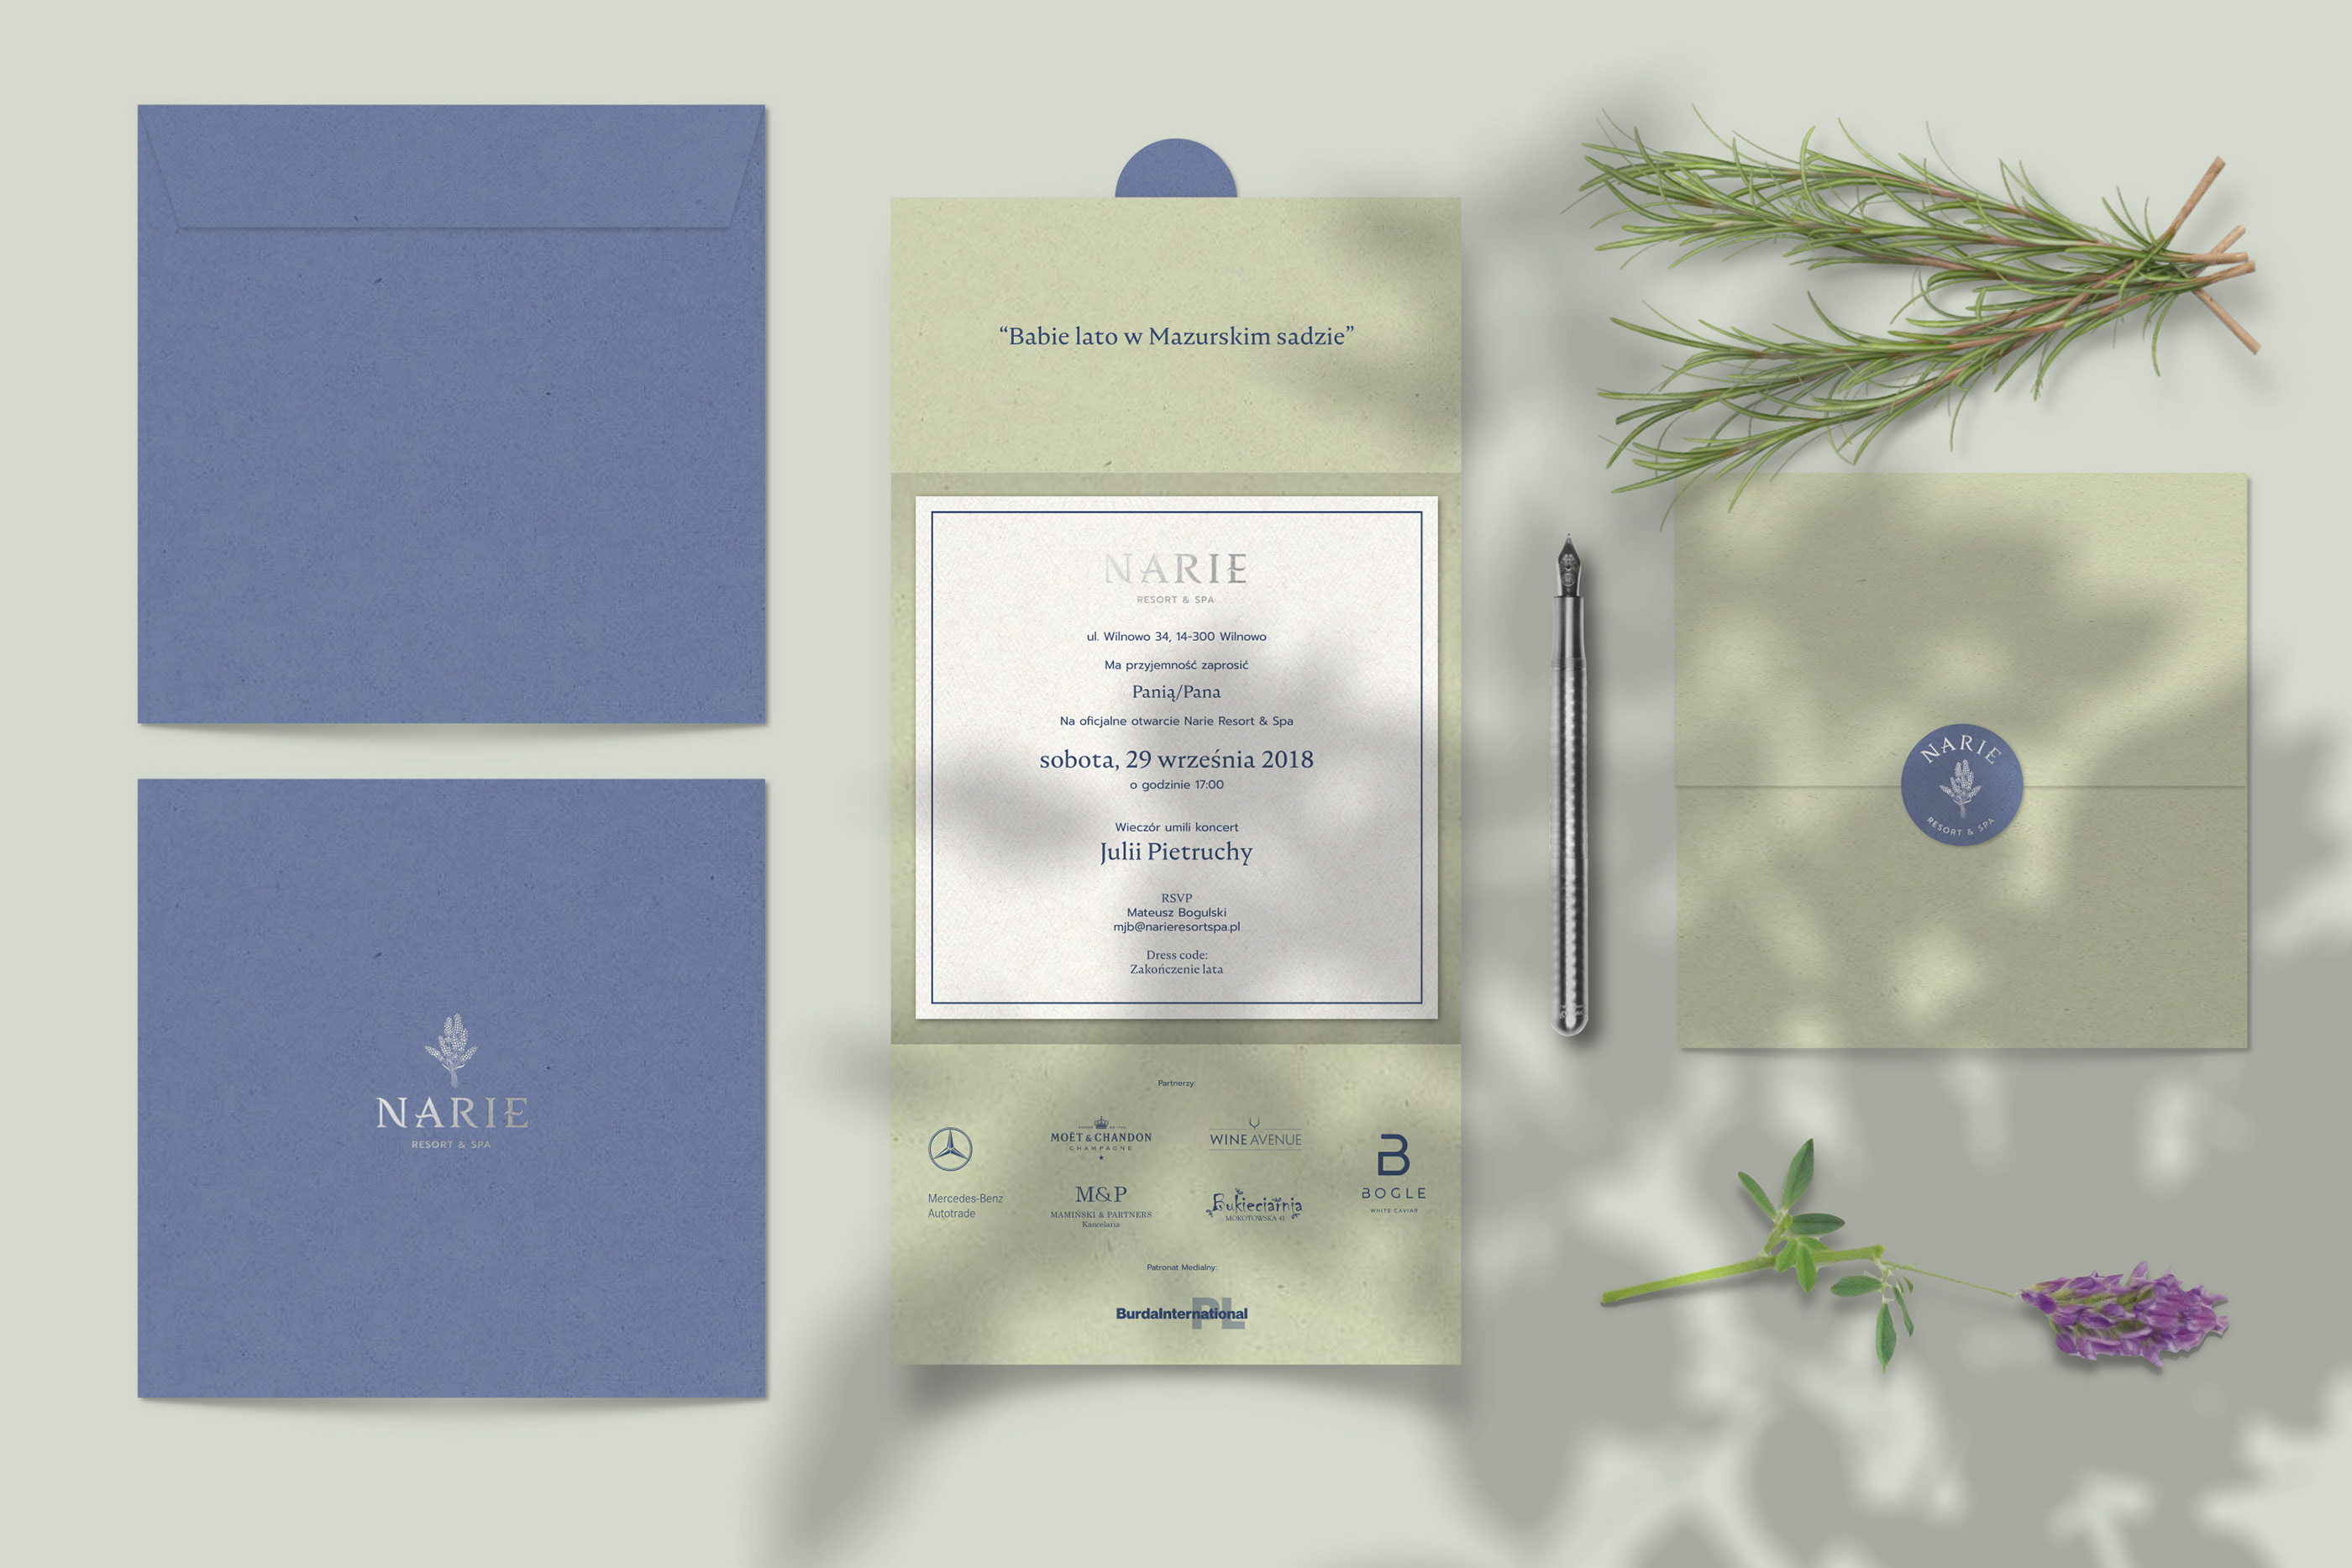 Narie Resort and Spa stationery printed on Crush Kiwi and Lavender 